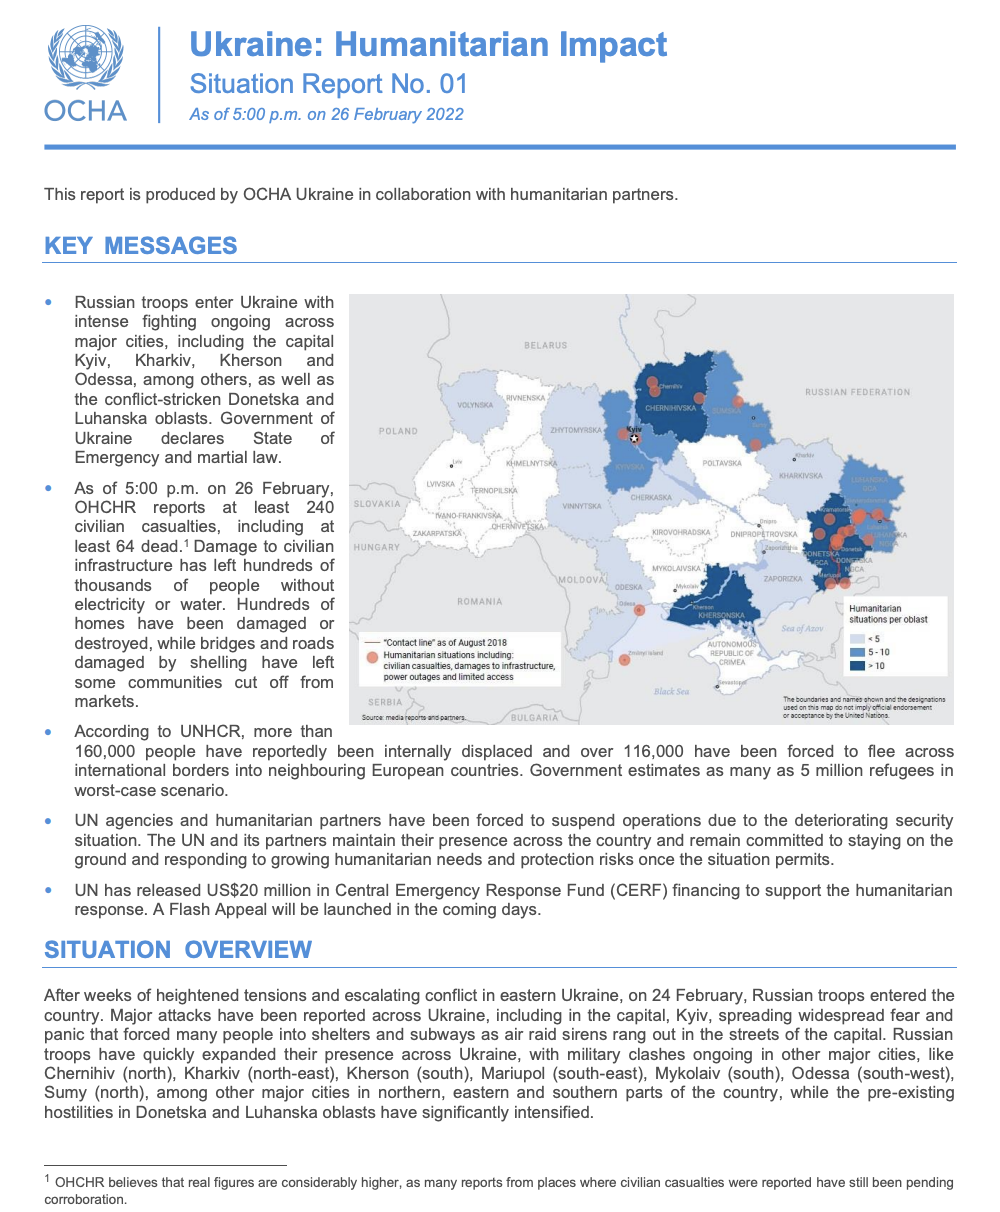 Ukraine: Humanitarian Impact Situation Report No. 1 (As of 5:00 p.m. on 26 February 2022)